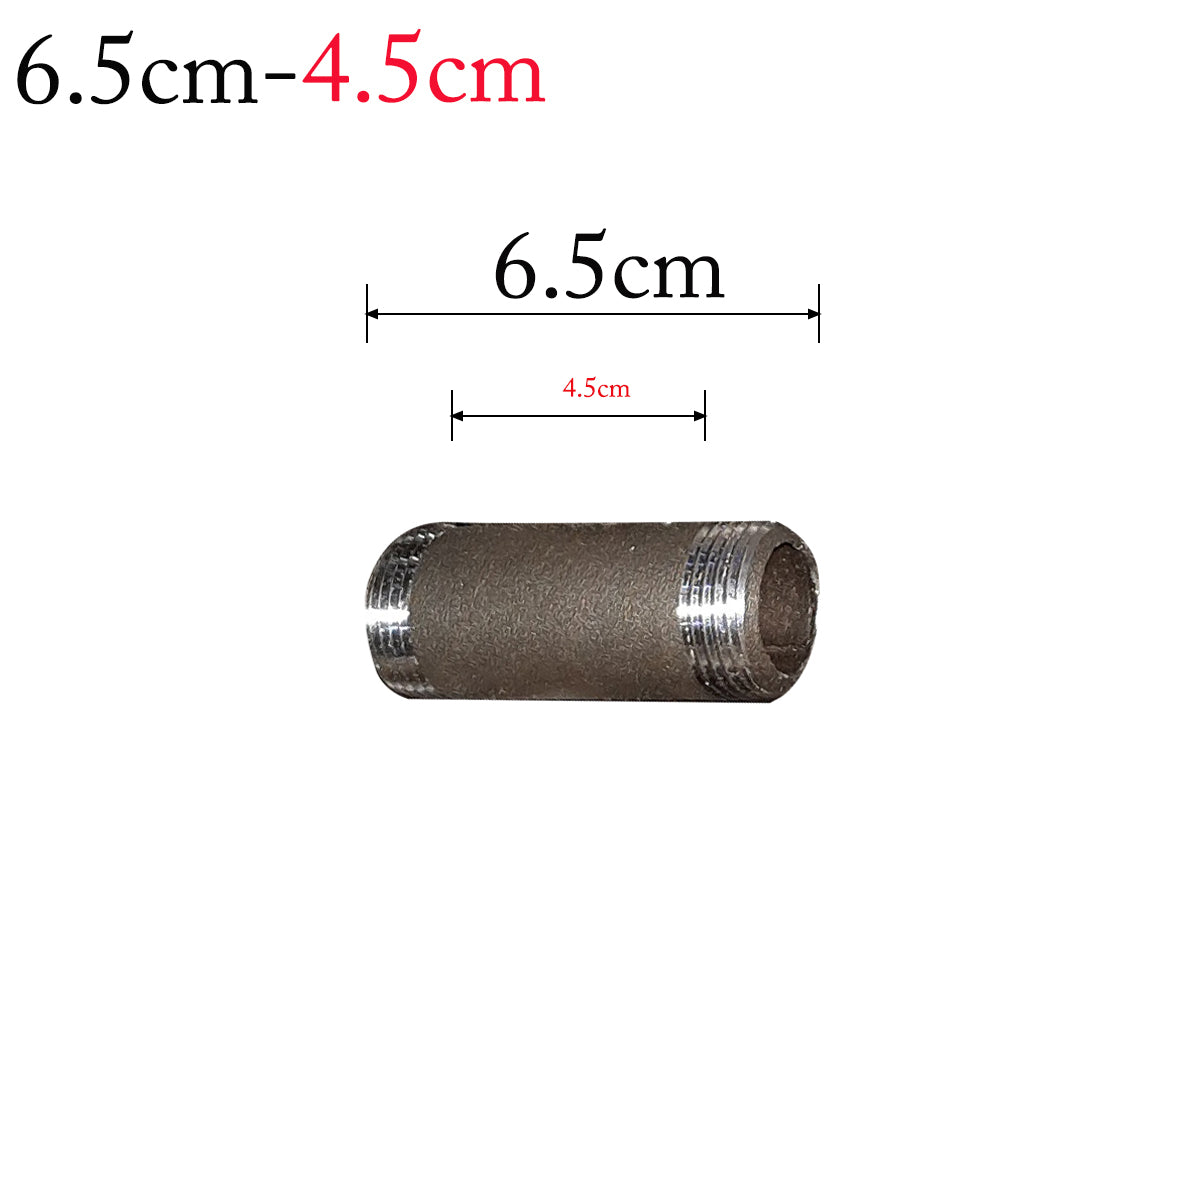 ¾ Inch Barrel Nipple Malleable Iron Fitting Male BSPT 3/4in to Male BSPT 3/4in - Black Variable Sizes From 2.5cm to 60cm~2694